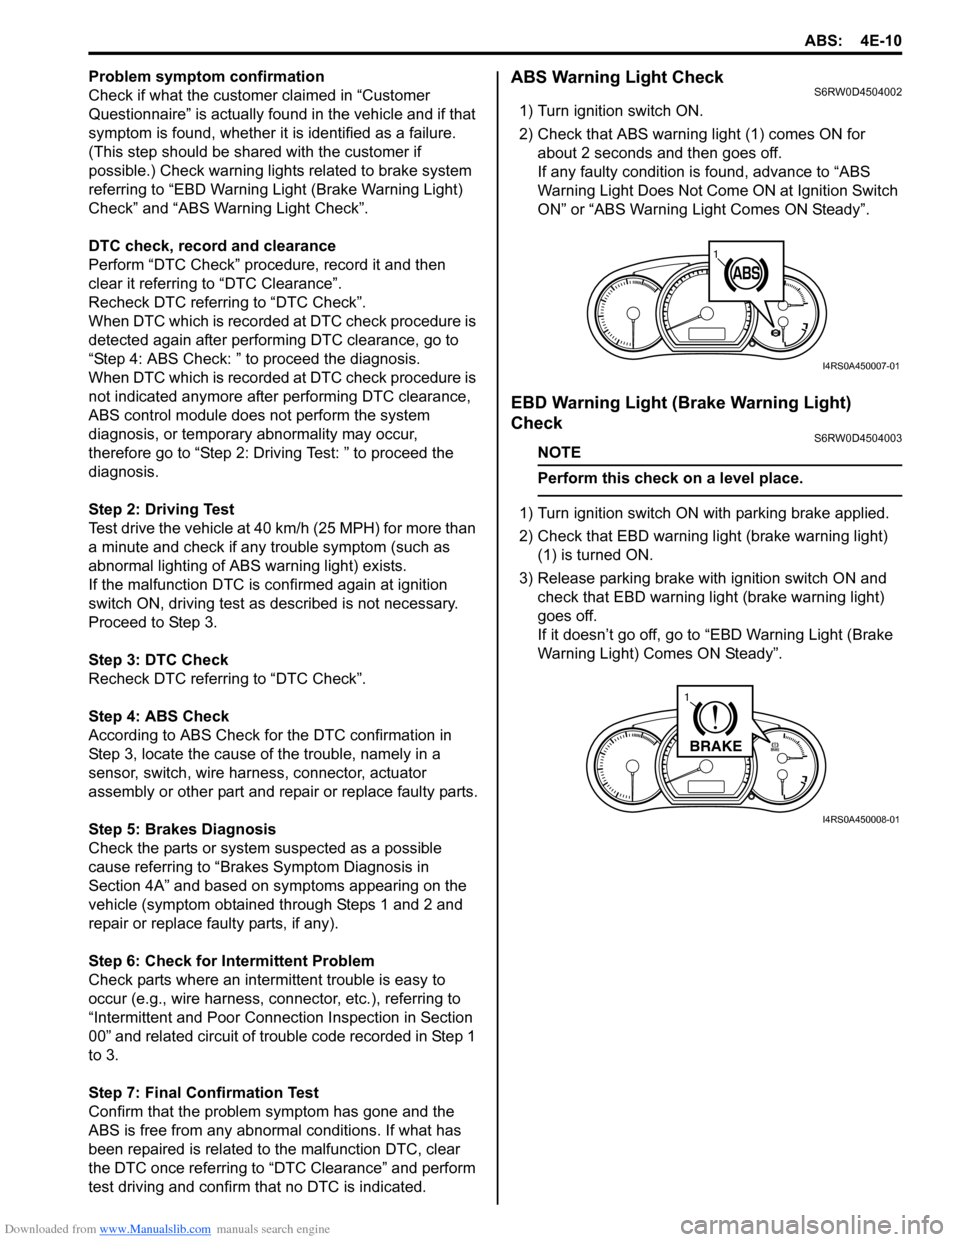 SUZUKI SX4 2006 1.G Service Owners Guide Downloaded from www.Manualslib.com manuals search engine ABS: 4E-10
Problem symptom confirmation
Check if what the customer claimed in “Customer 
Questionnaire” is actually found in the vehicle an